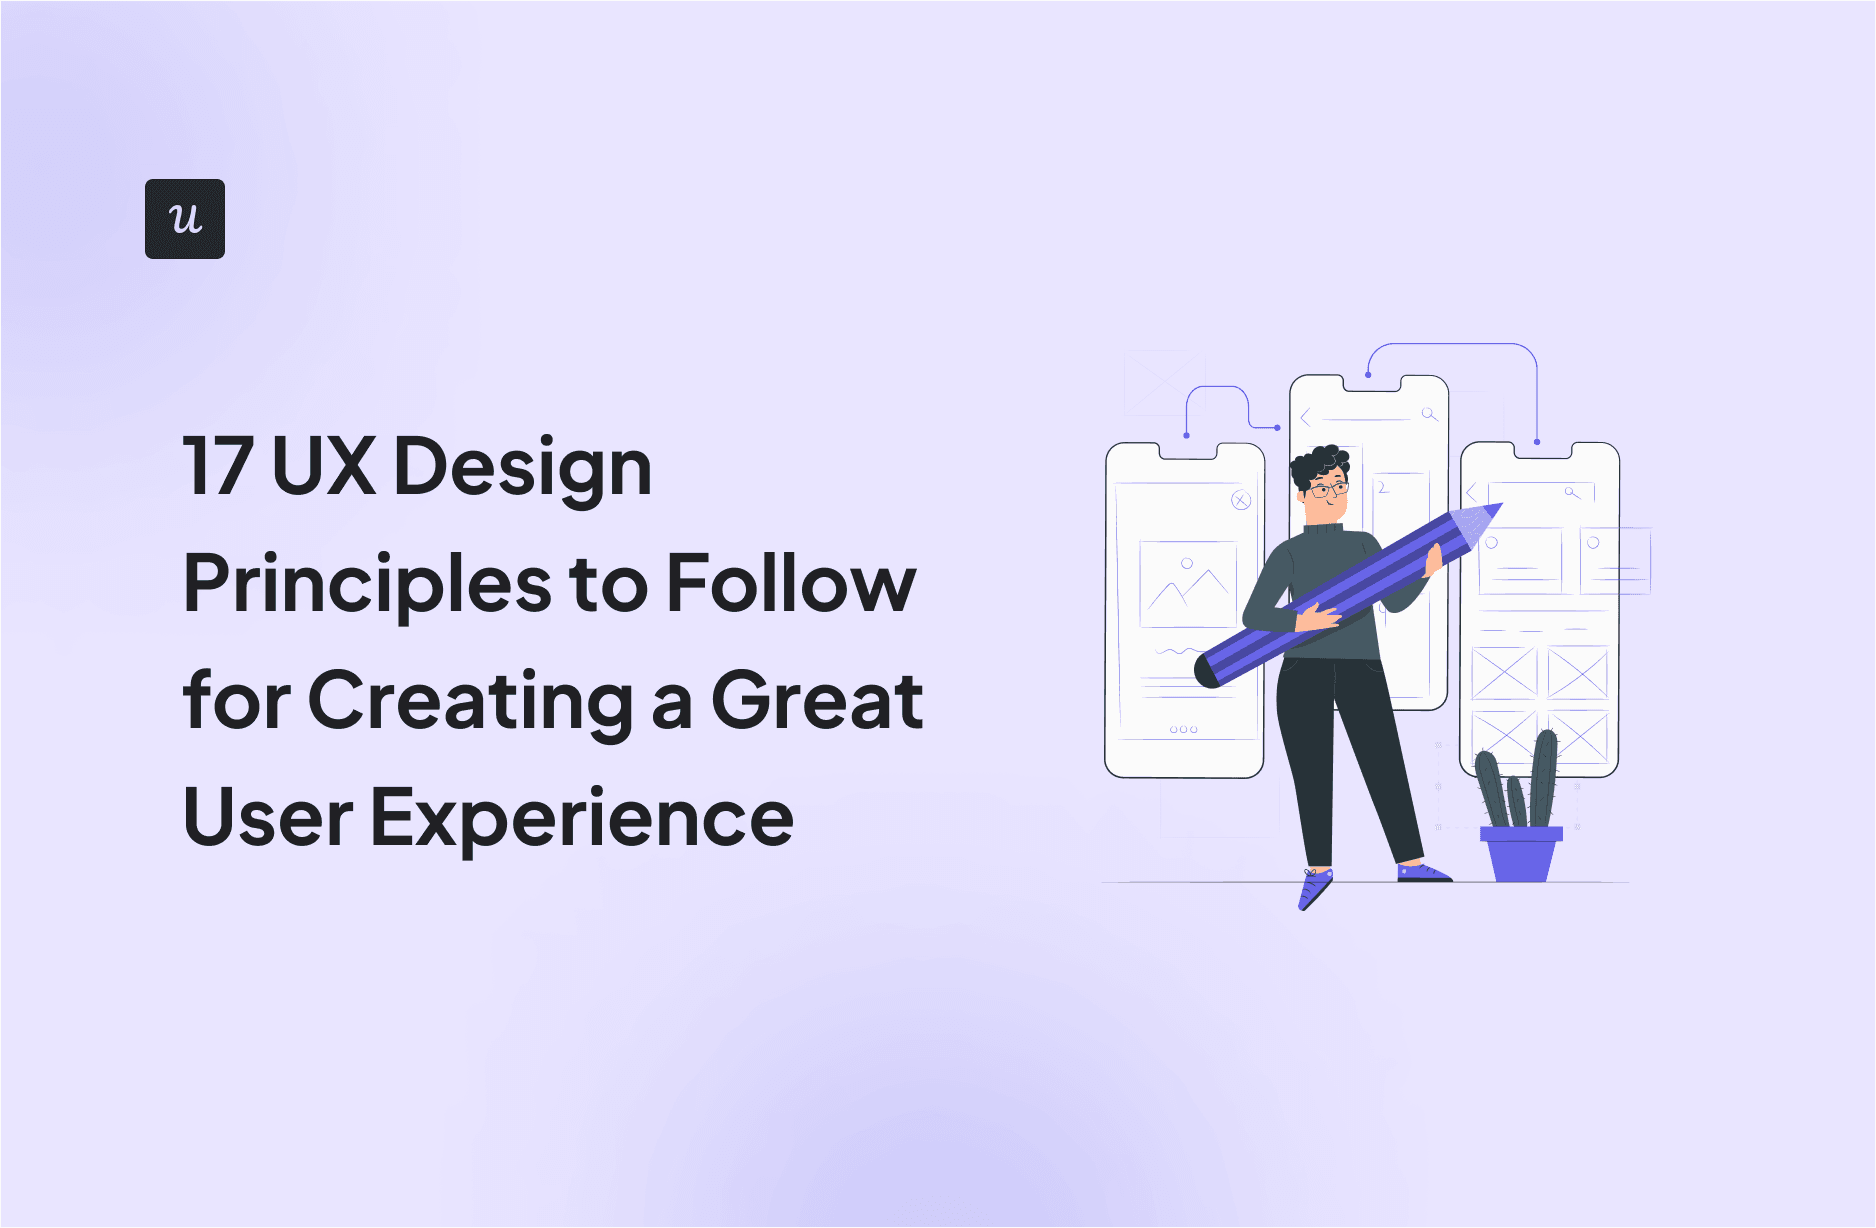 17 UX Design Principles to Follow for Creating a Great User Experience cover